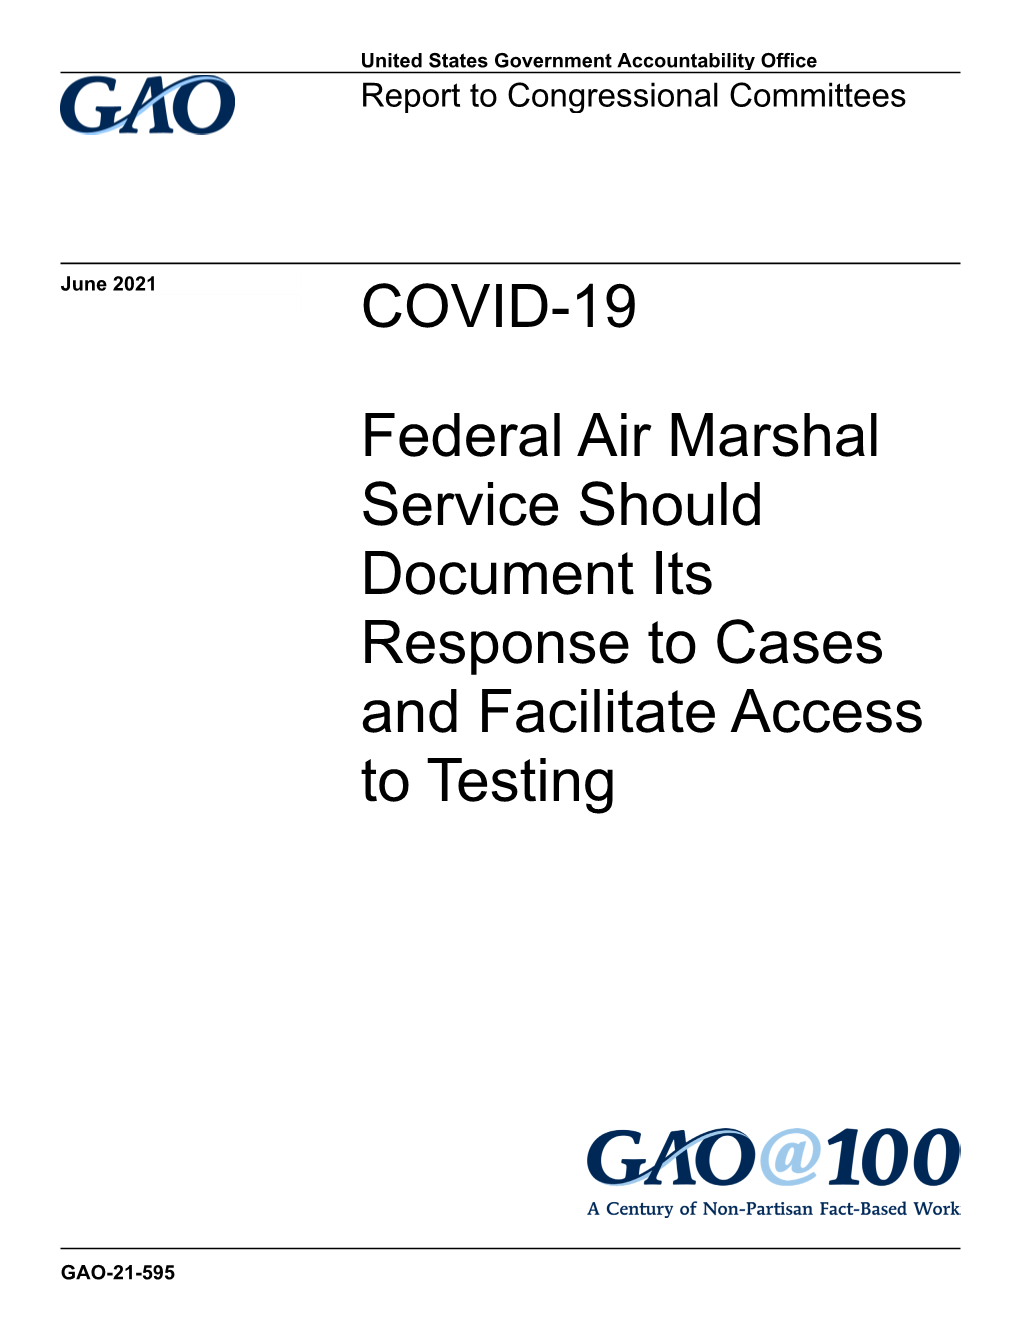 GAO-21-595, COVID-19: Federal Air Marshal Service Should Document